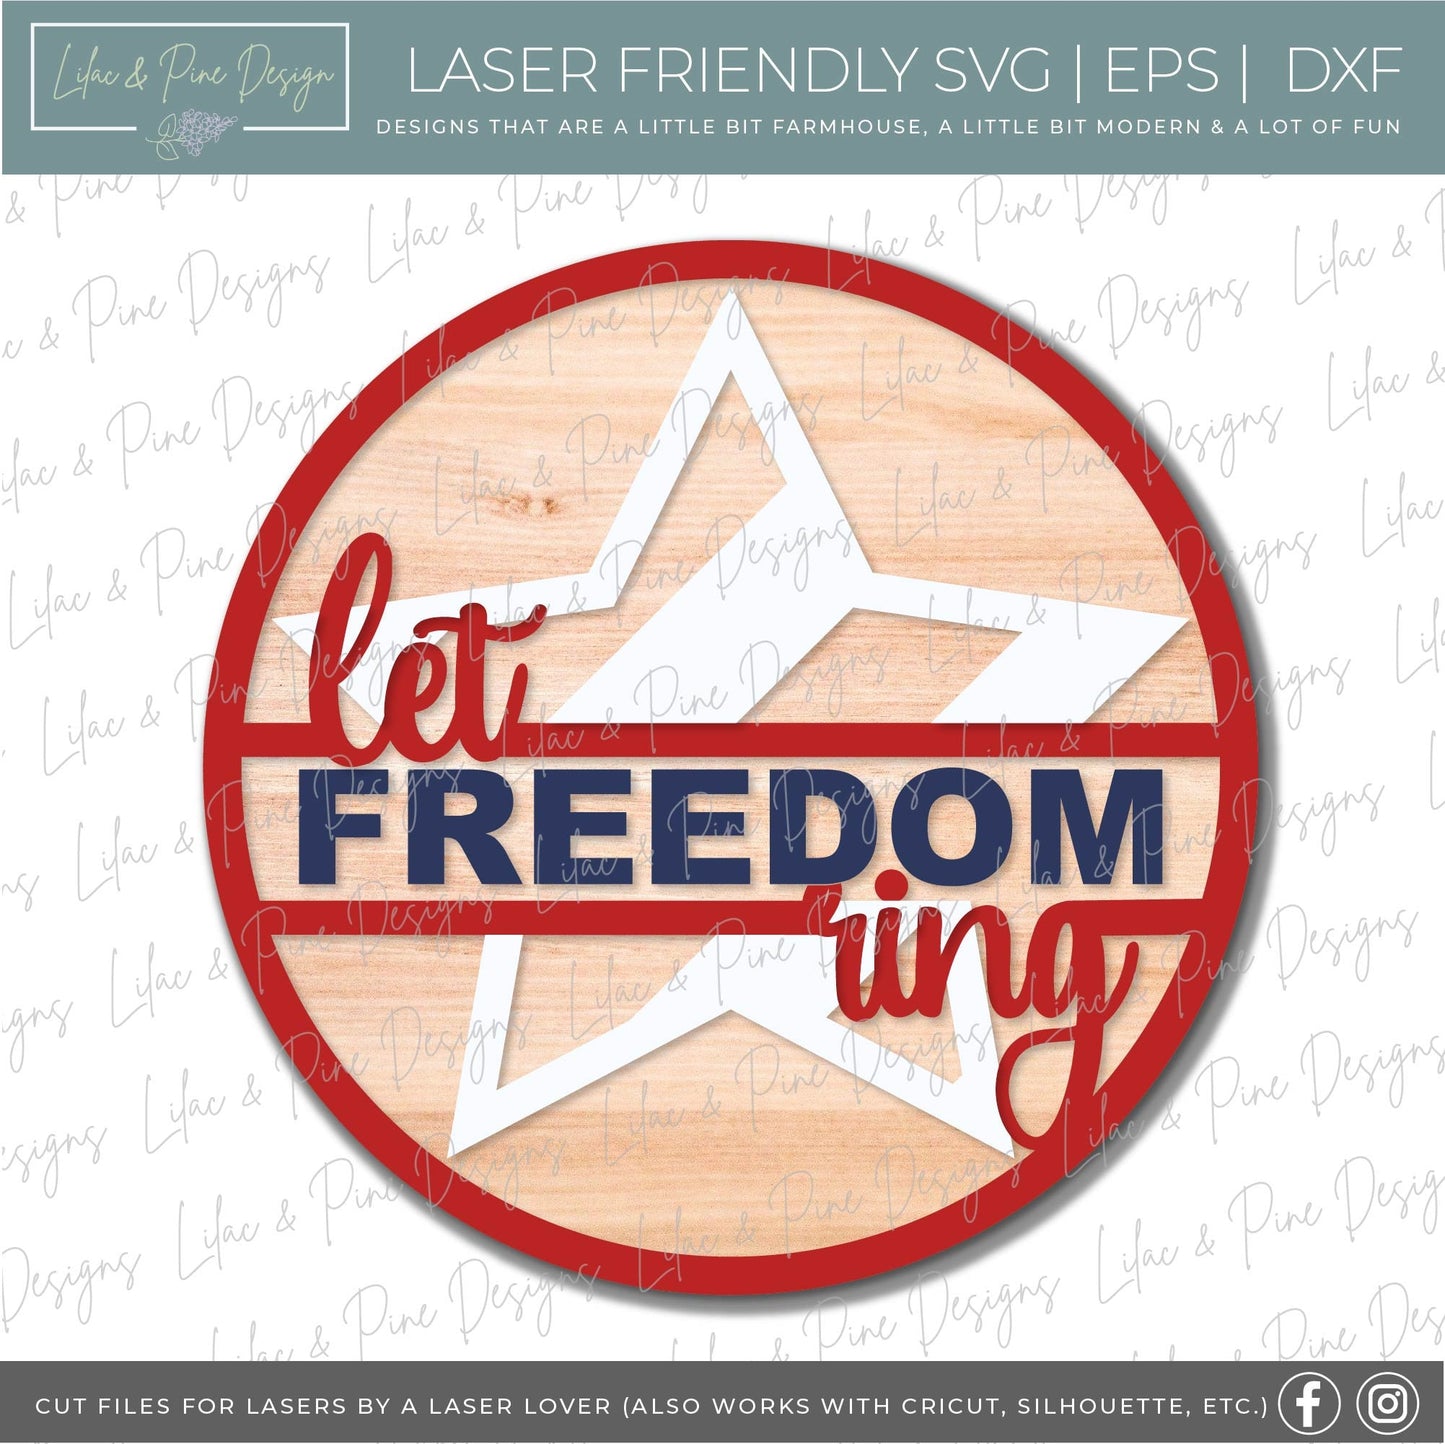 Let Freedom Ring round sign, July 4th door decor, Stars SVG, Independence Day porch sign, Stars and Stripes, Glowforge Svg, laser cut file